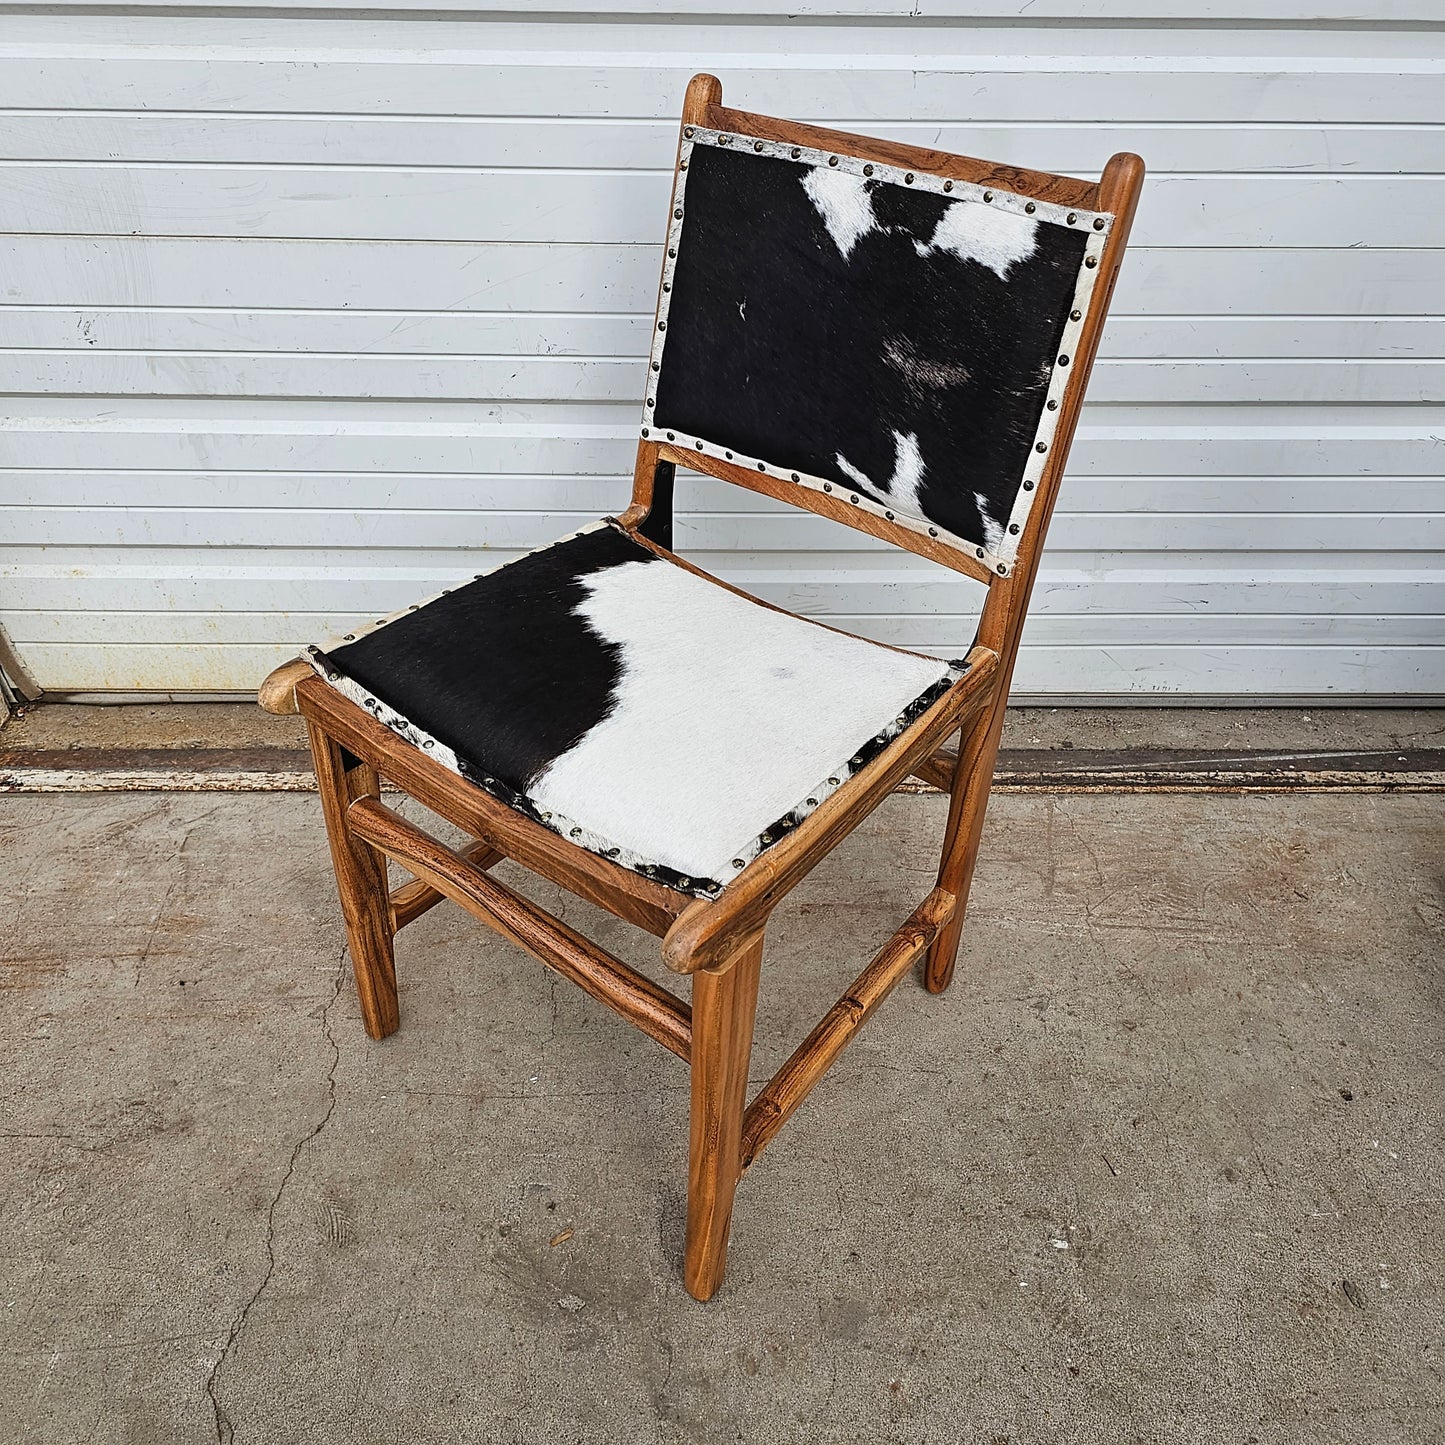 Wood Chair w/Cow Hide Seat